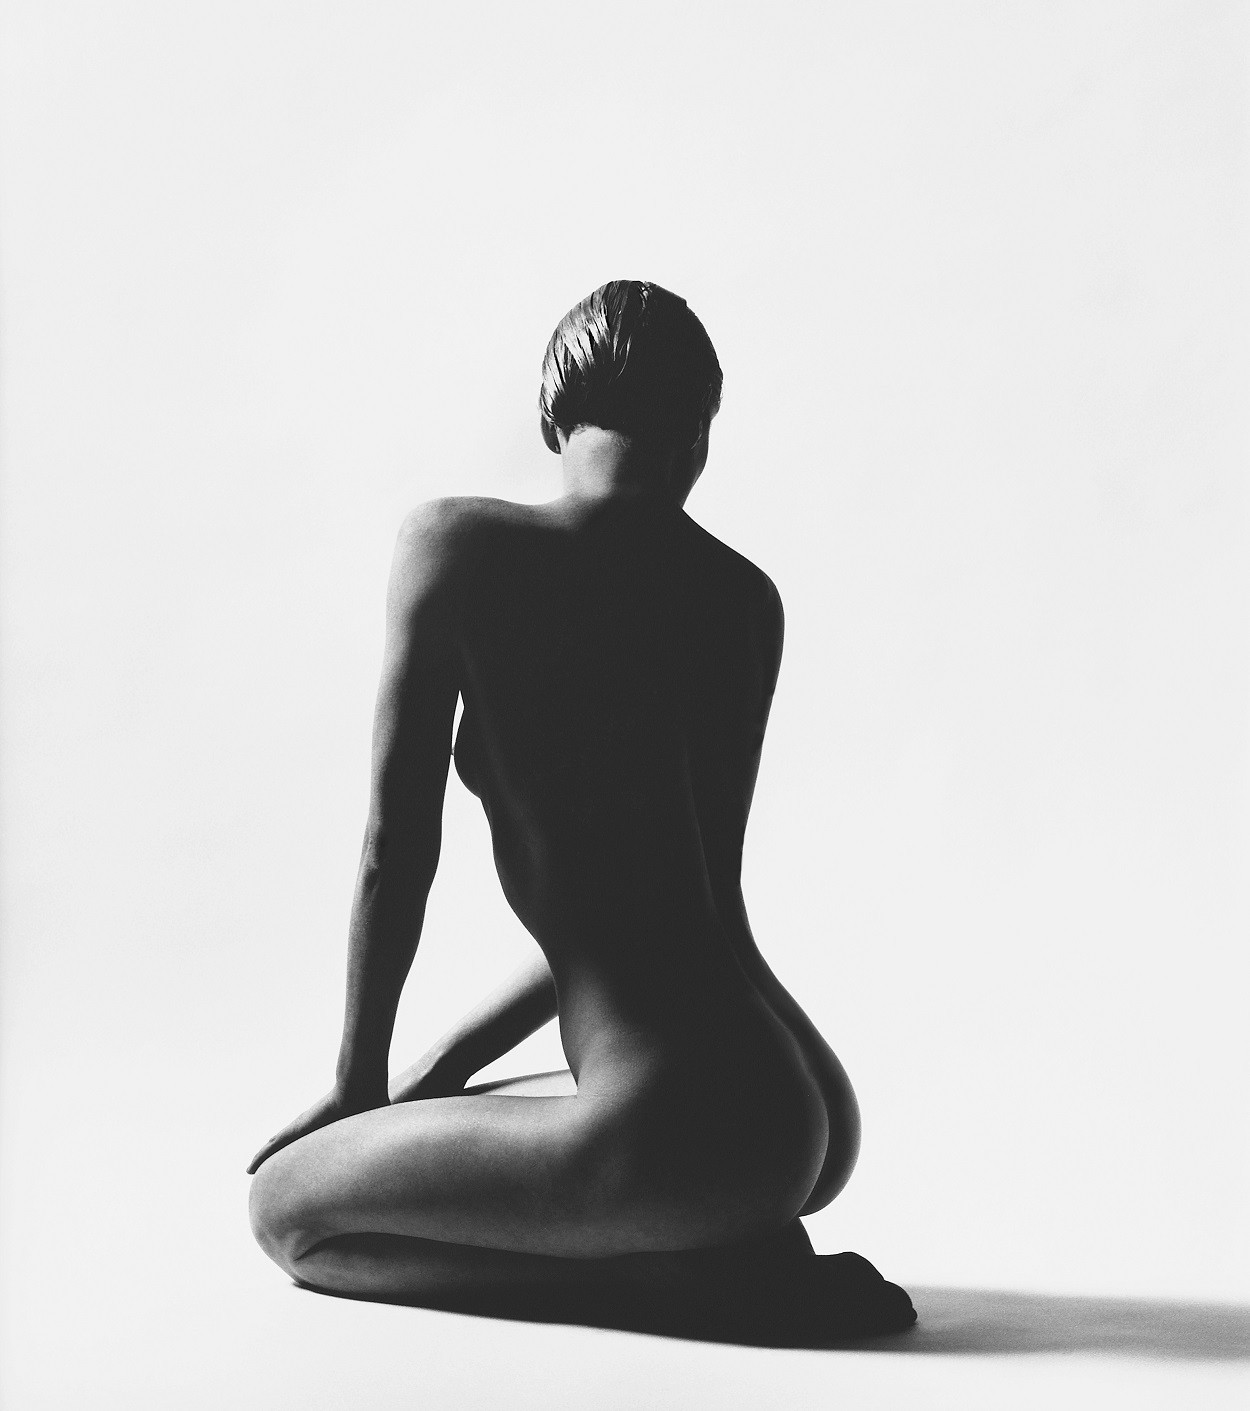 Artistic Nude in black and white by fashion photographer Ormond GIGLI.